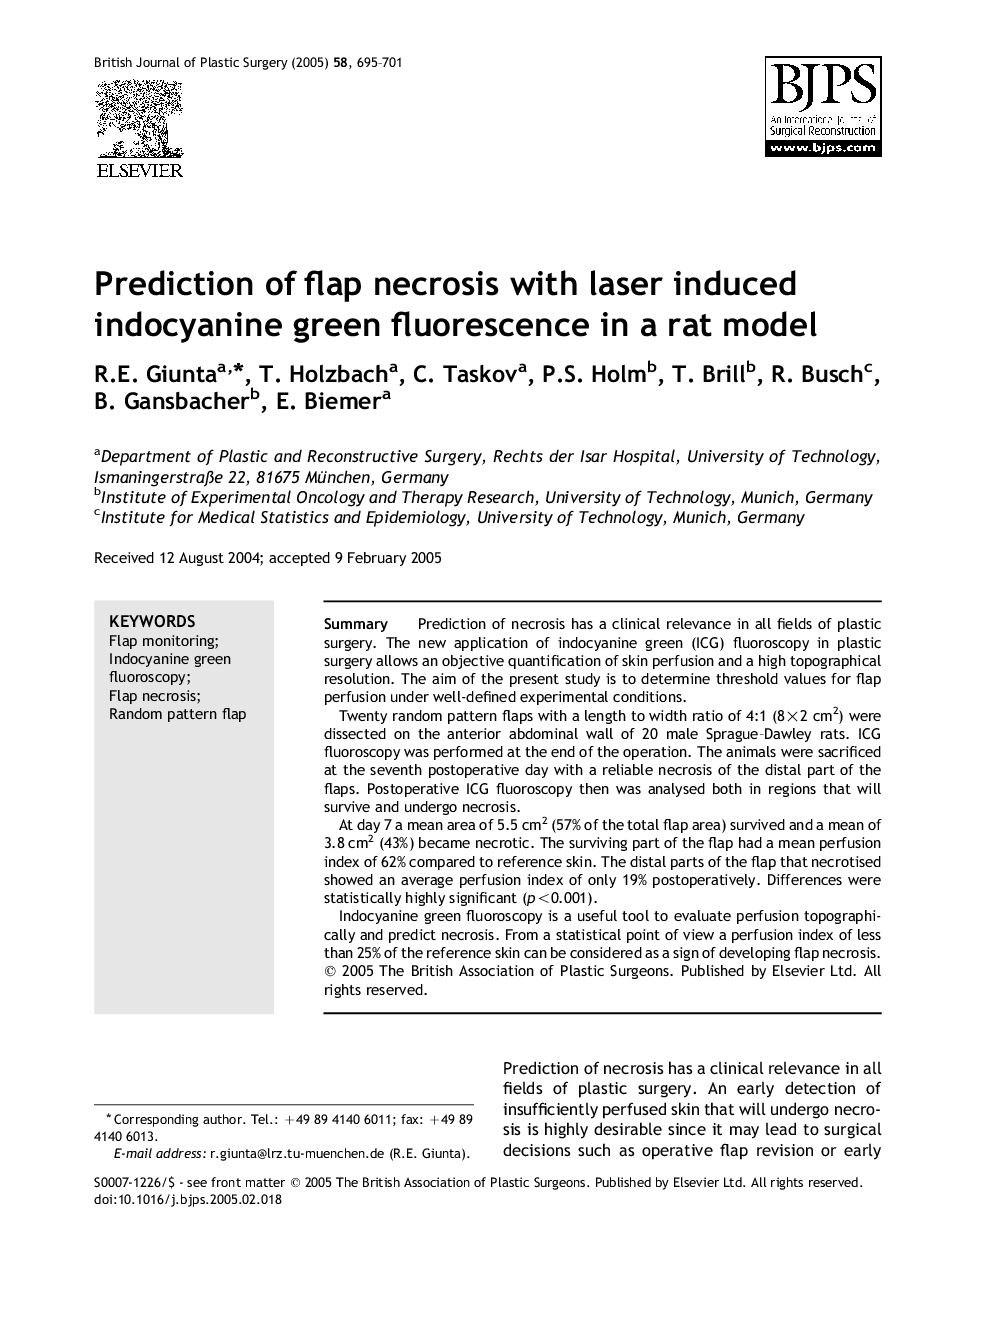 Prediction of flap necrosis with laser induced indocyanine green fluorescence in a rat model